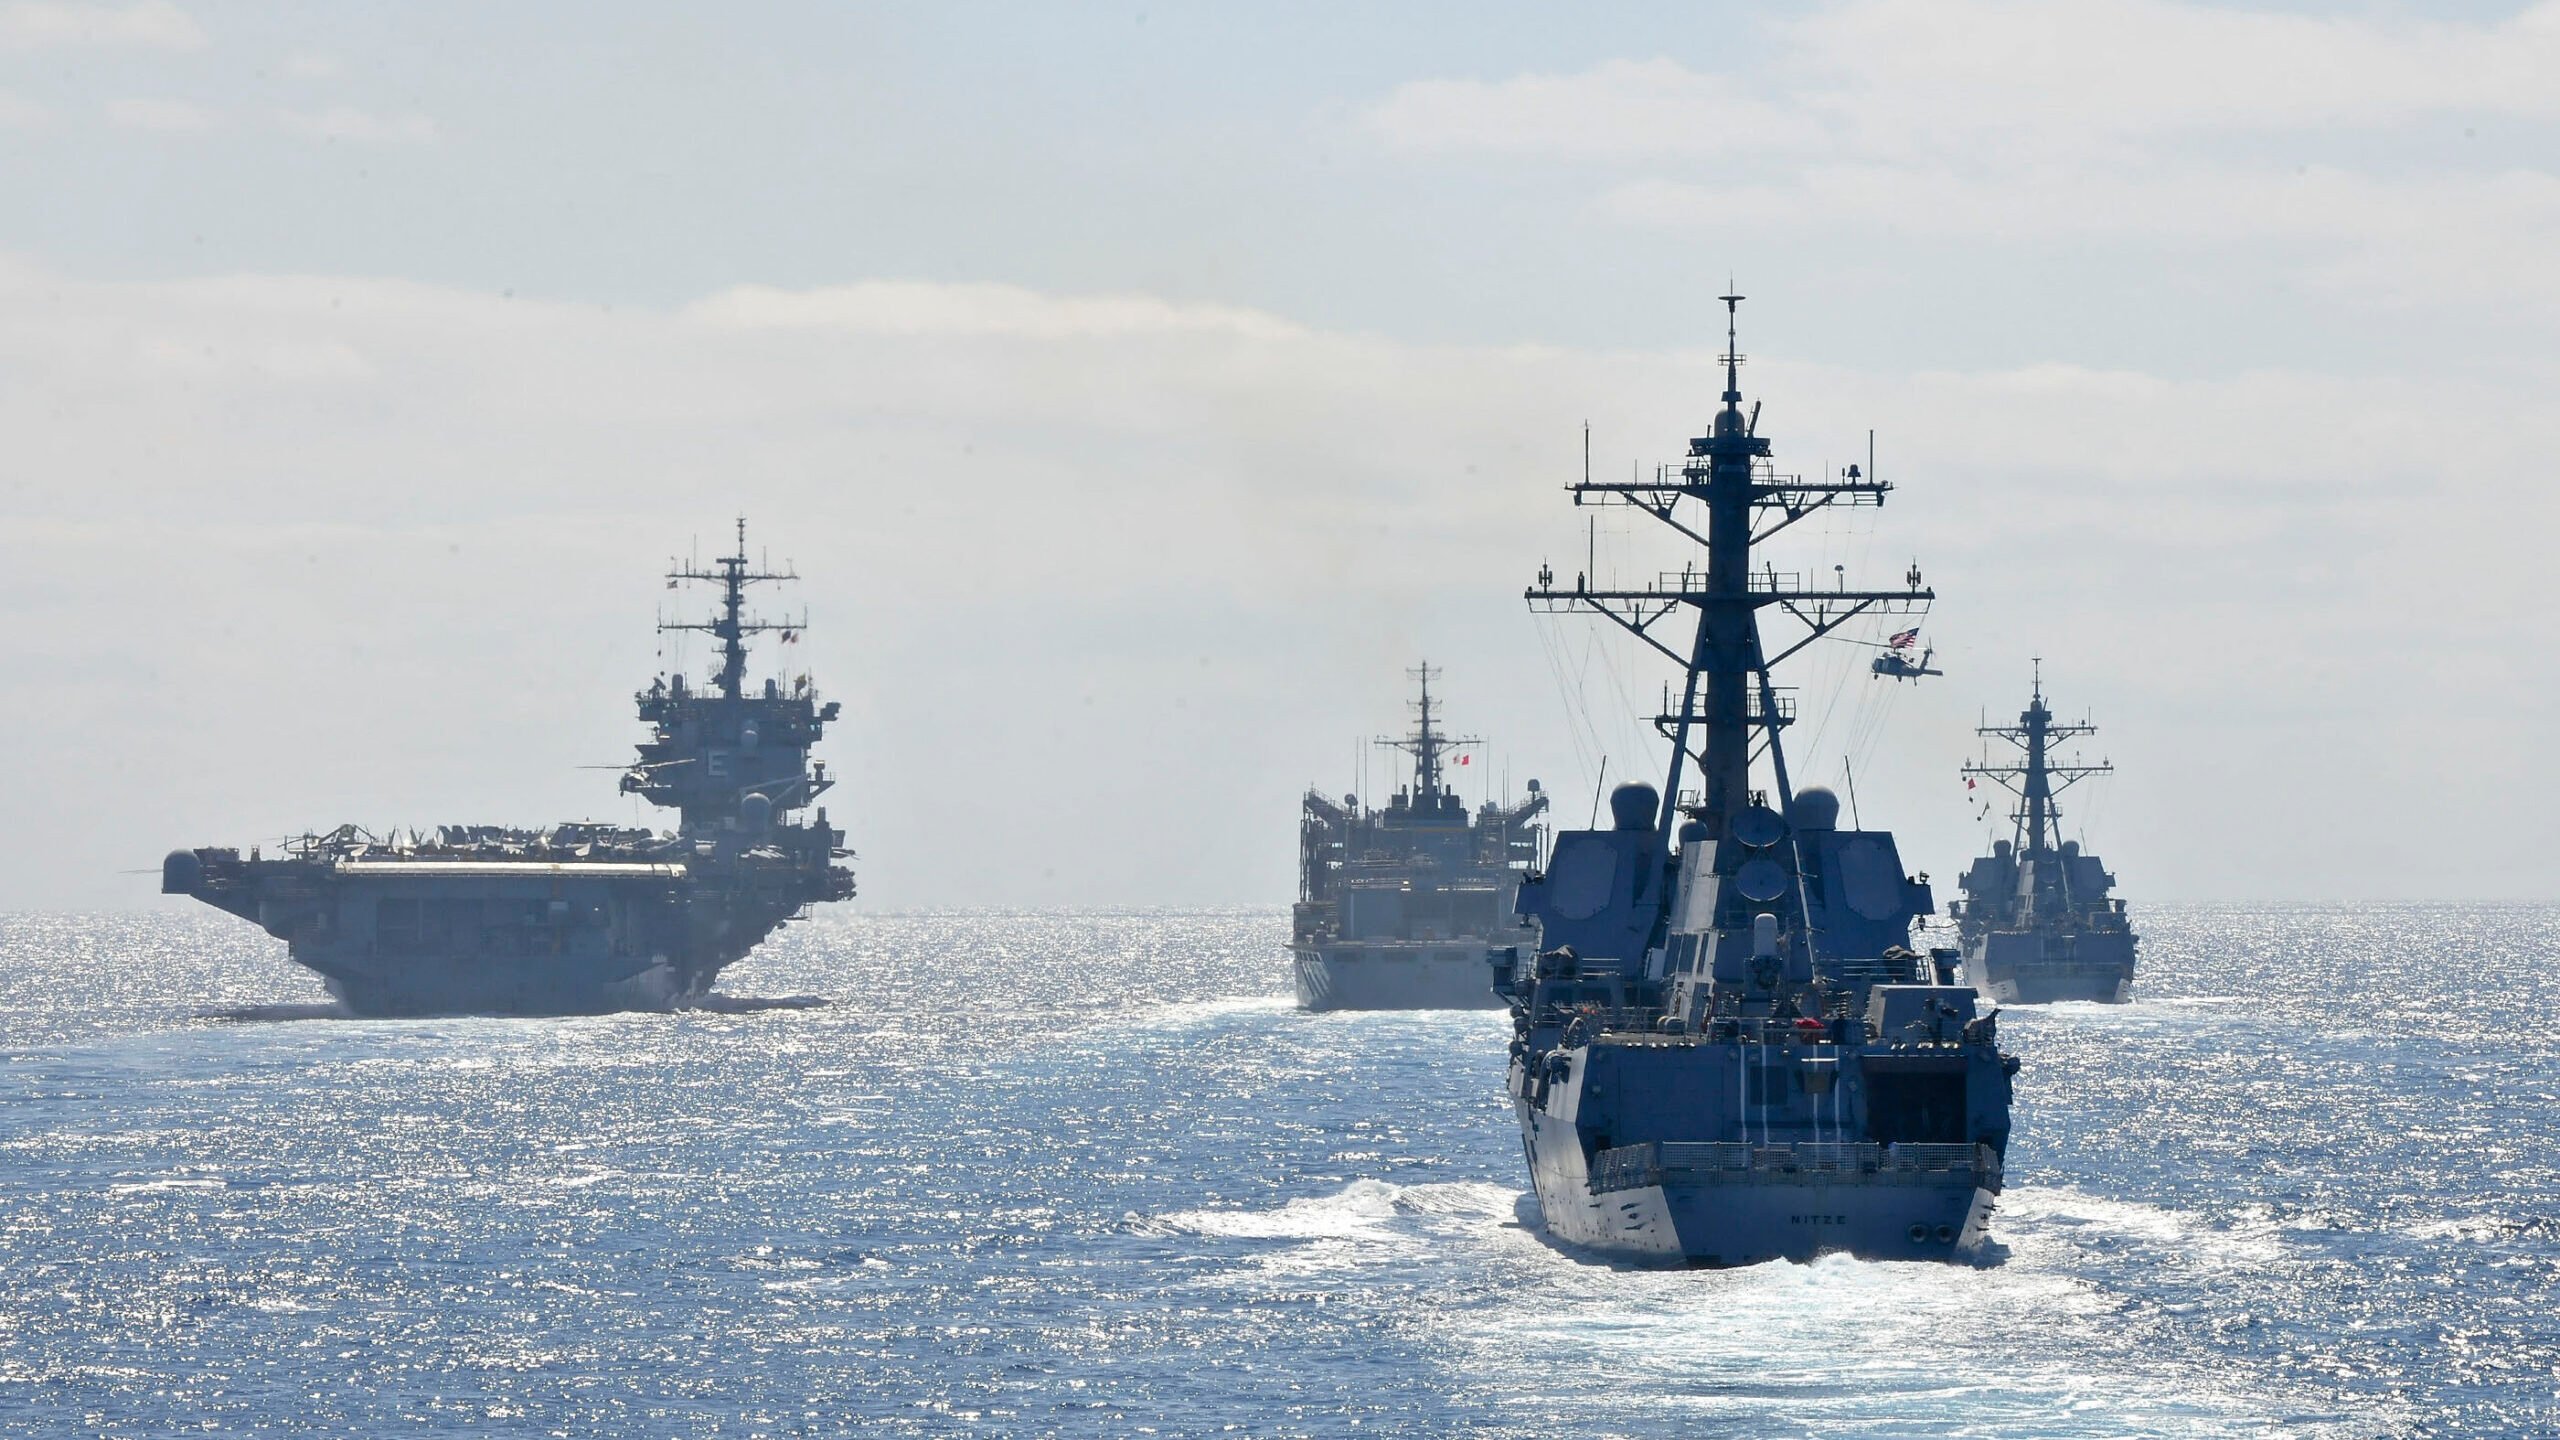 The last thing the Navy needs is another congressional panel